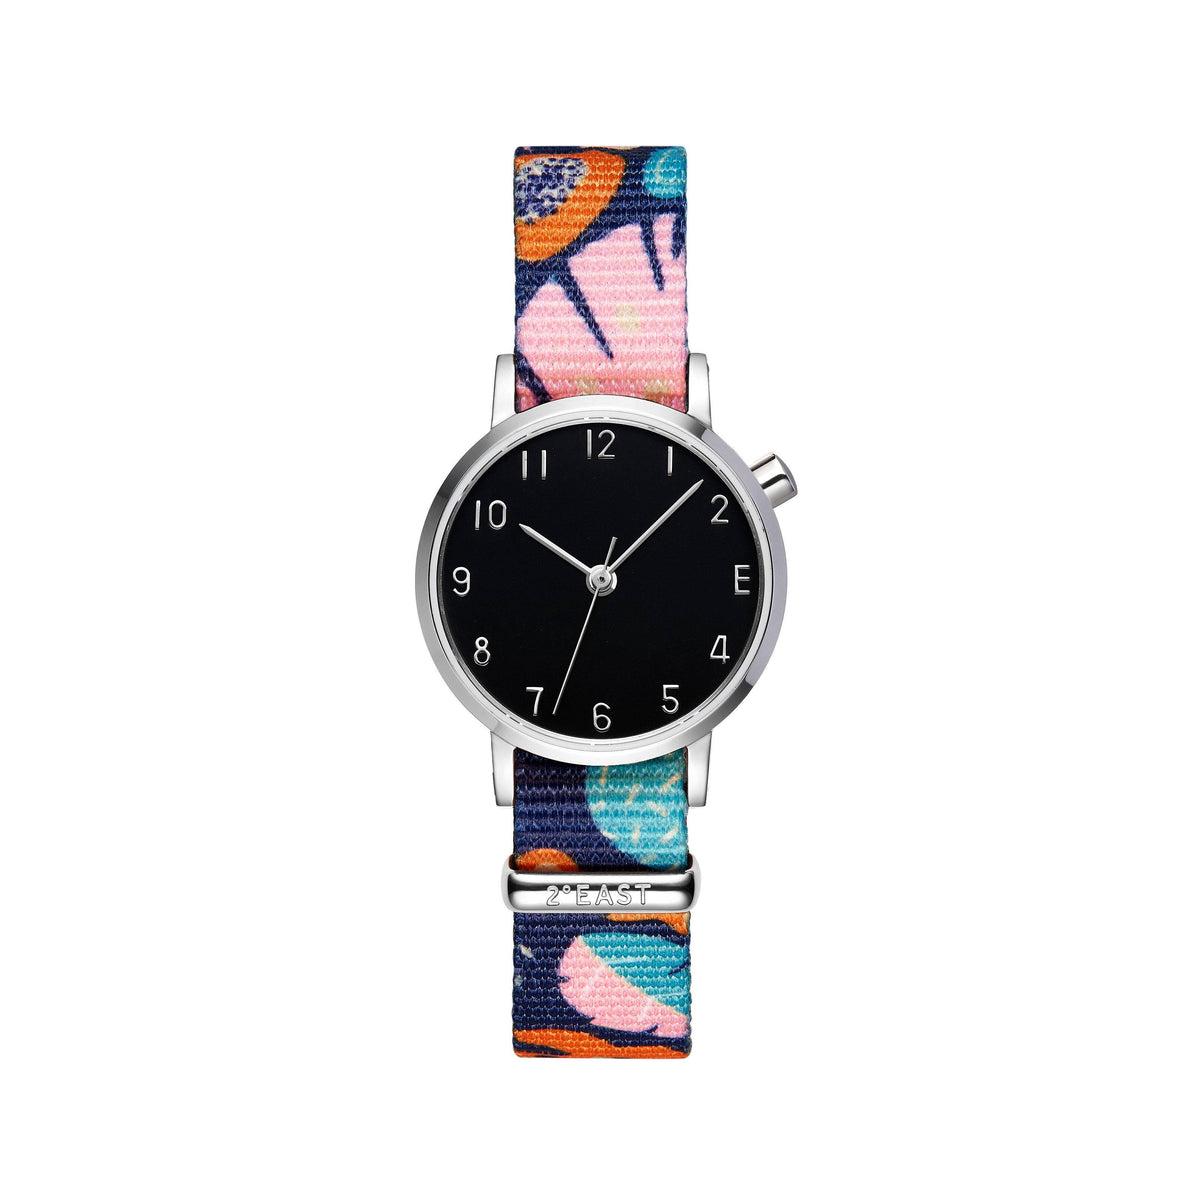 The Black and Silver Watch - Tropical (Kids)